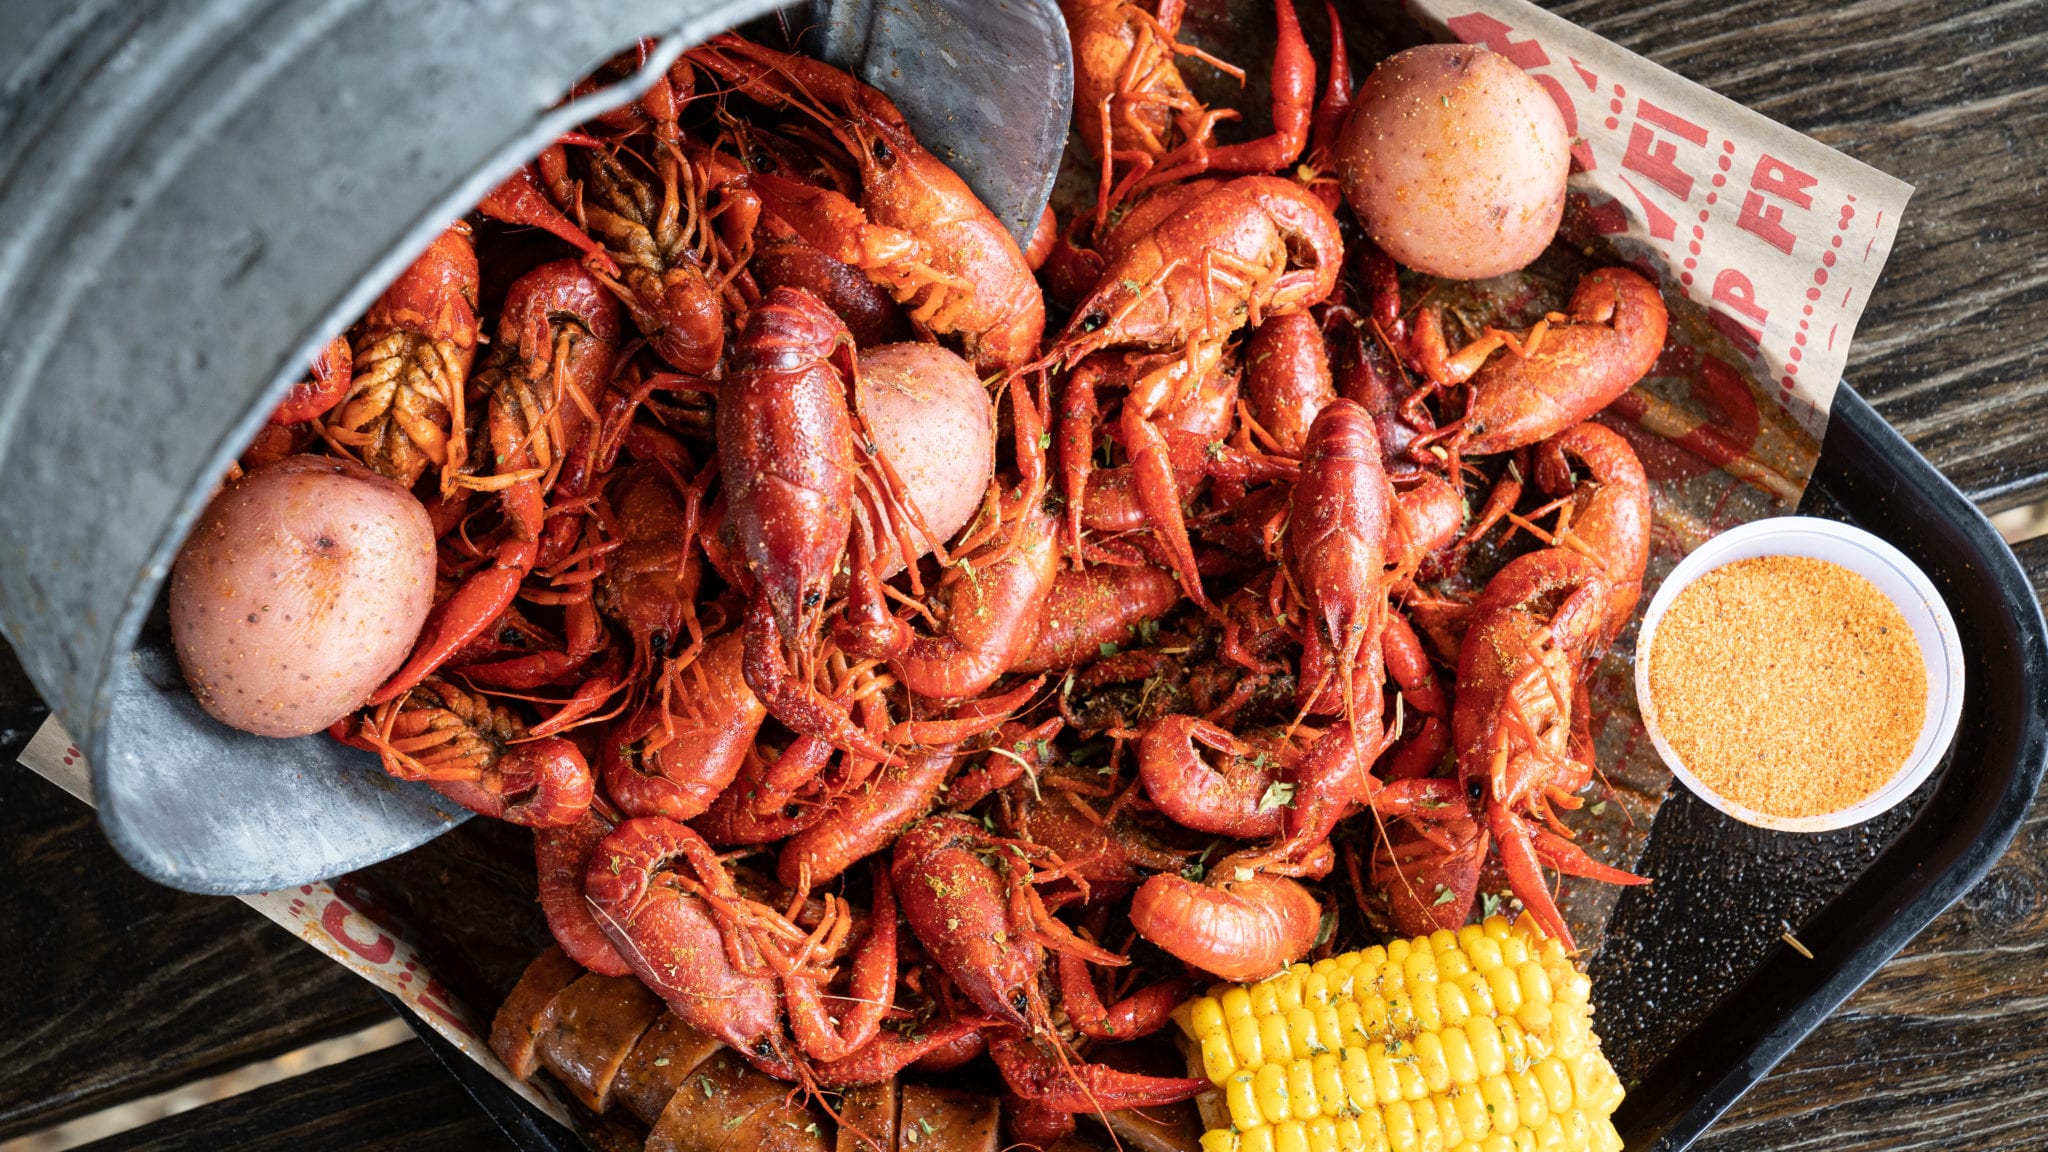 Crawfish season is quickly approaching!